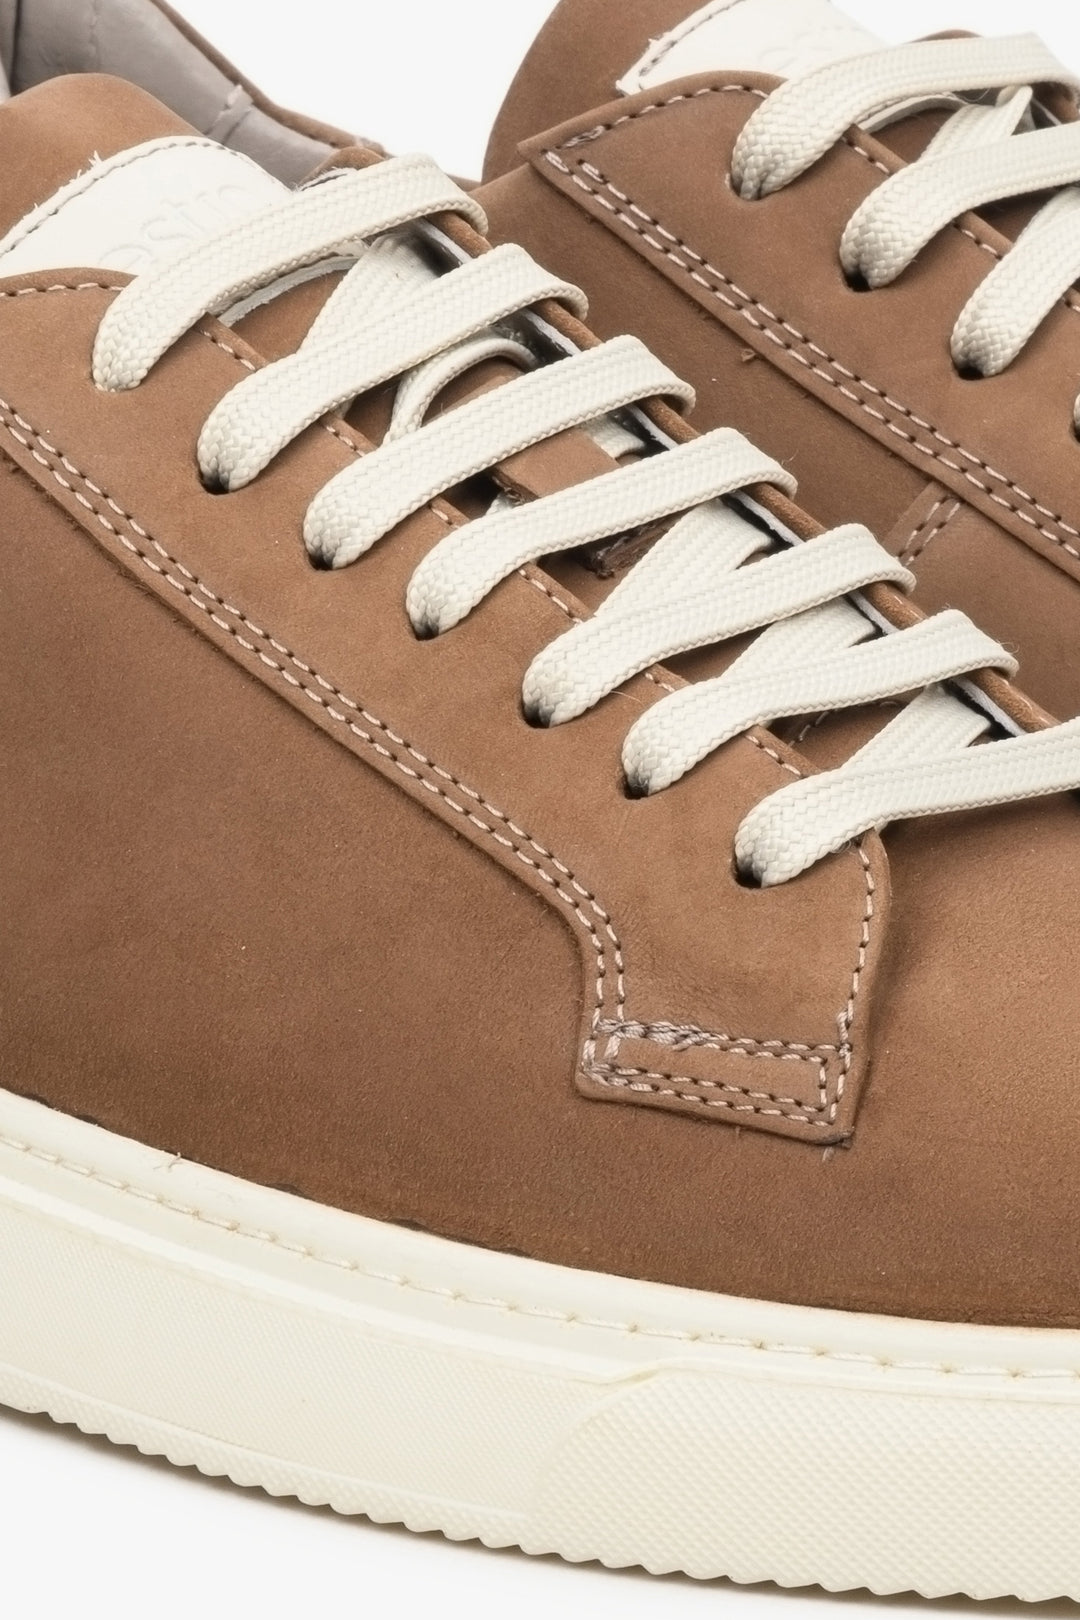 Men's brown nubuck sneakers for spring - a close-up of the sewing system.